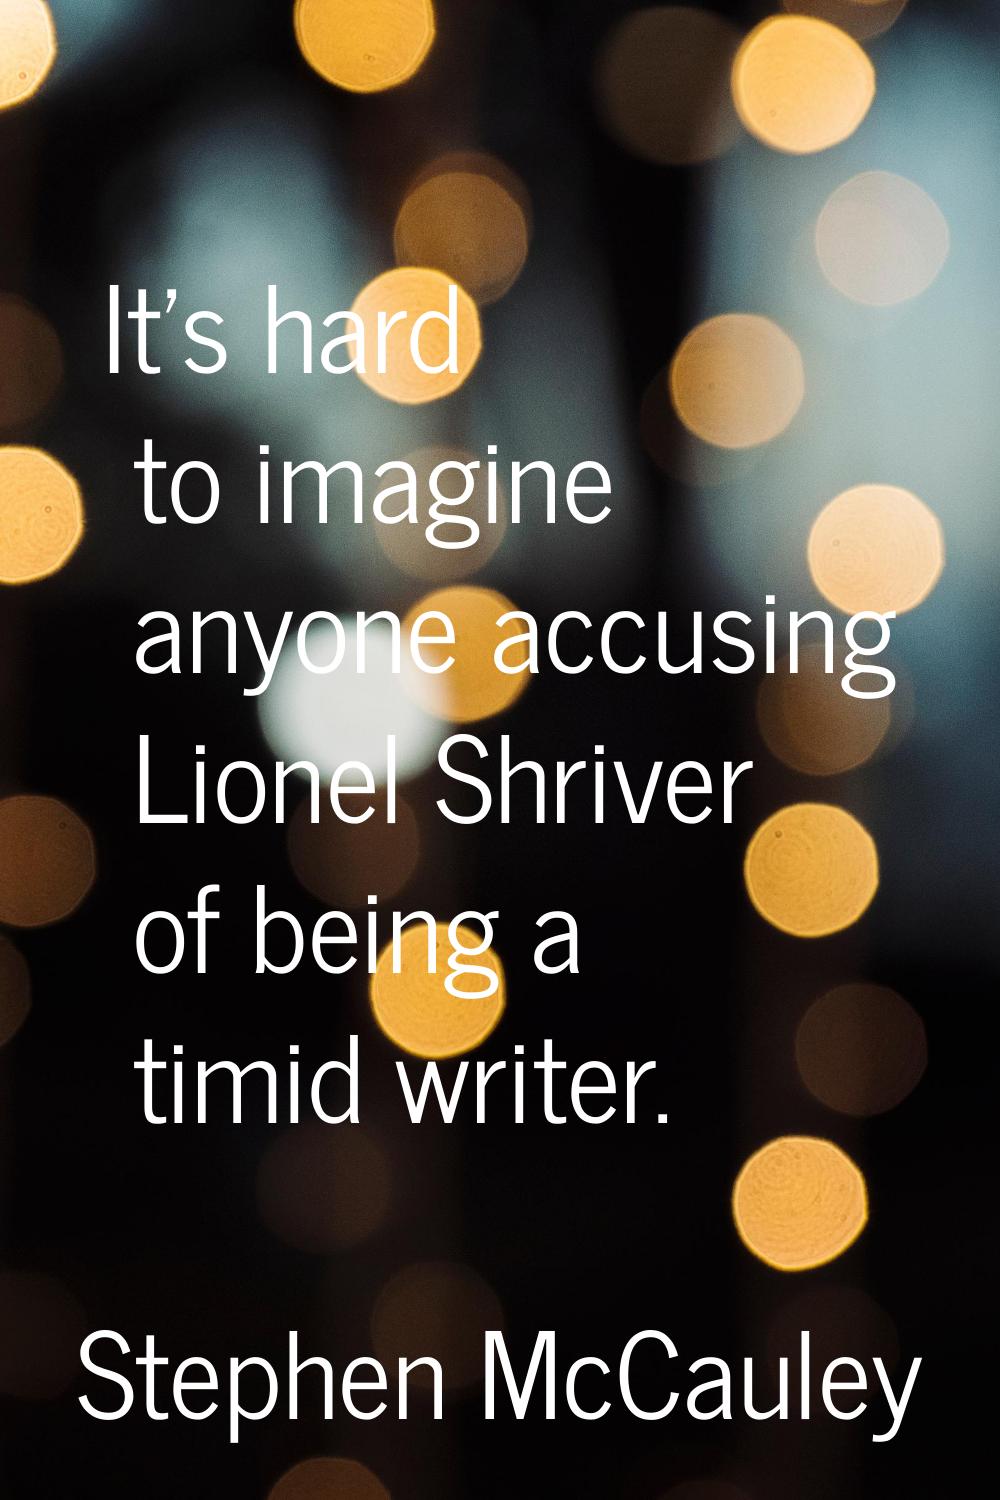 It's hard to imagine anyone accusing Lionel Shriver of being a timid writer.